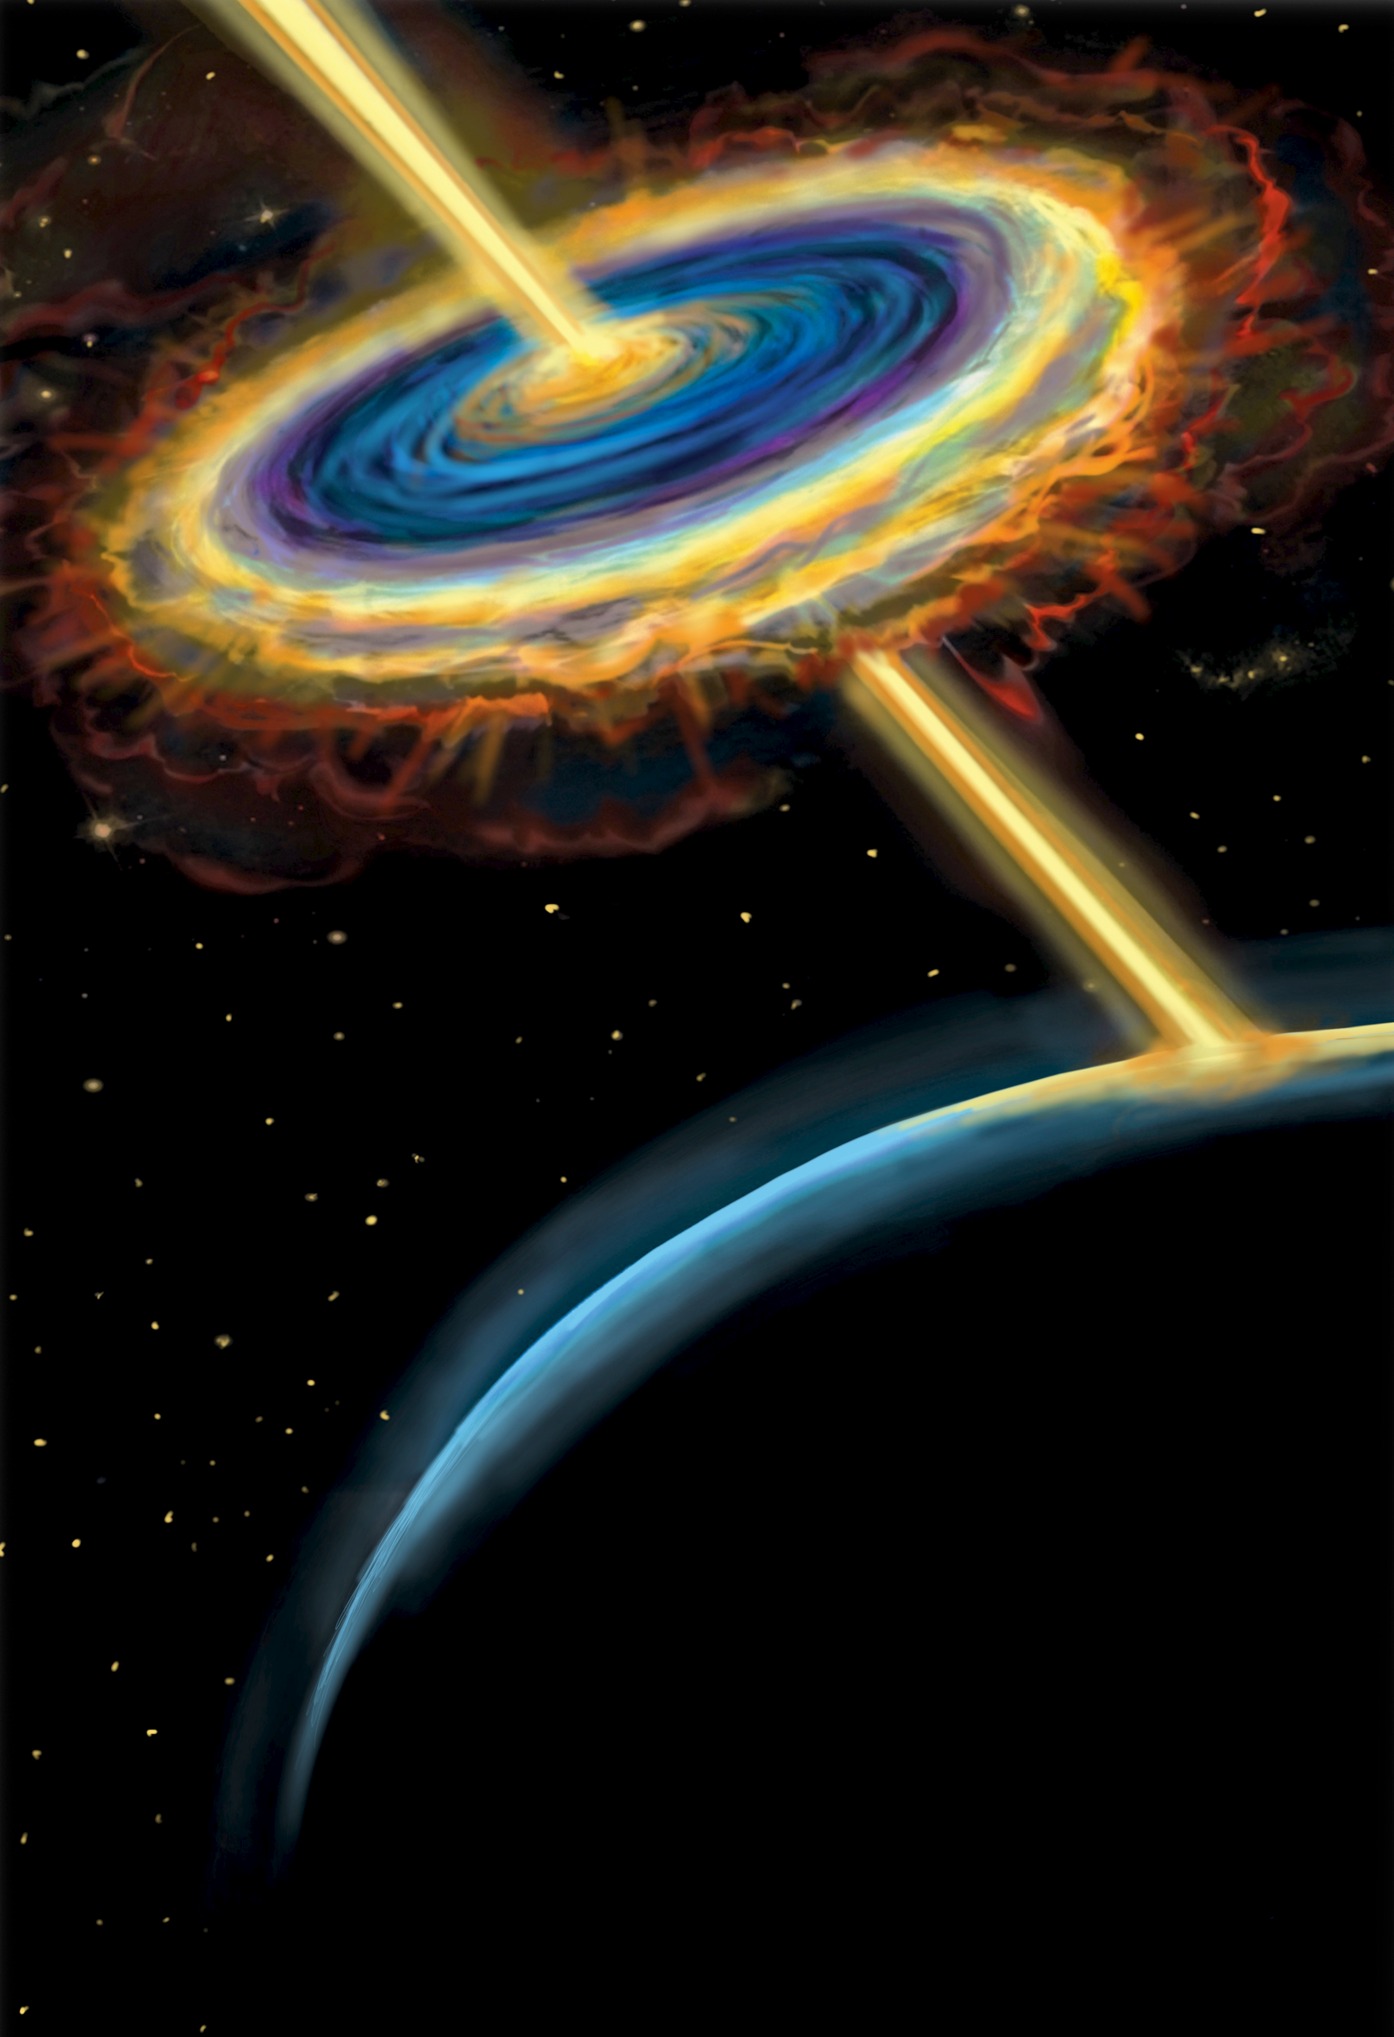 Quasar Illustration from The Speed Of Life by James Victor Jordan